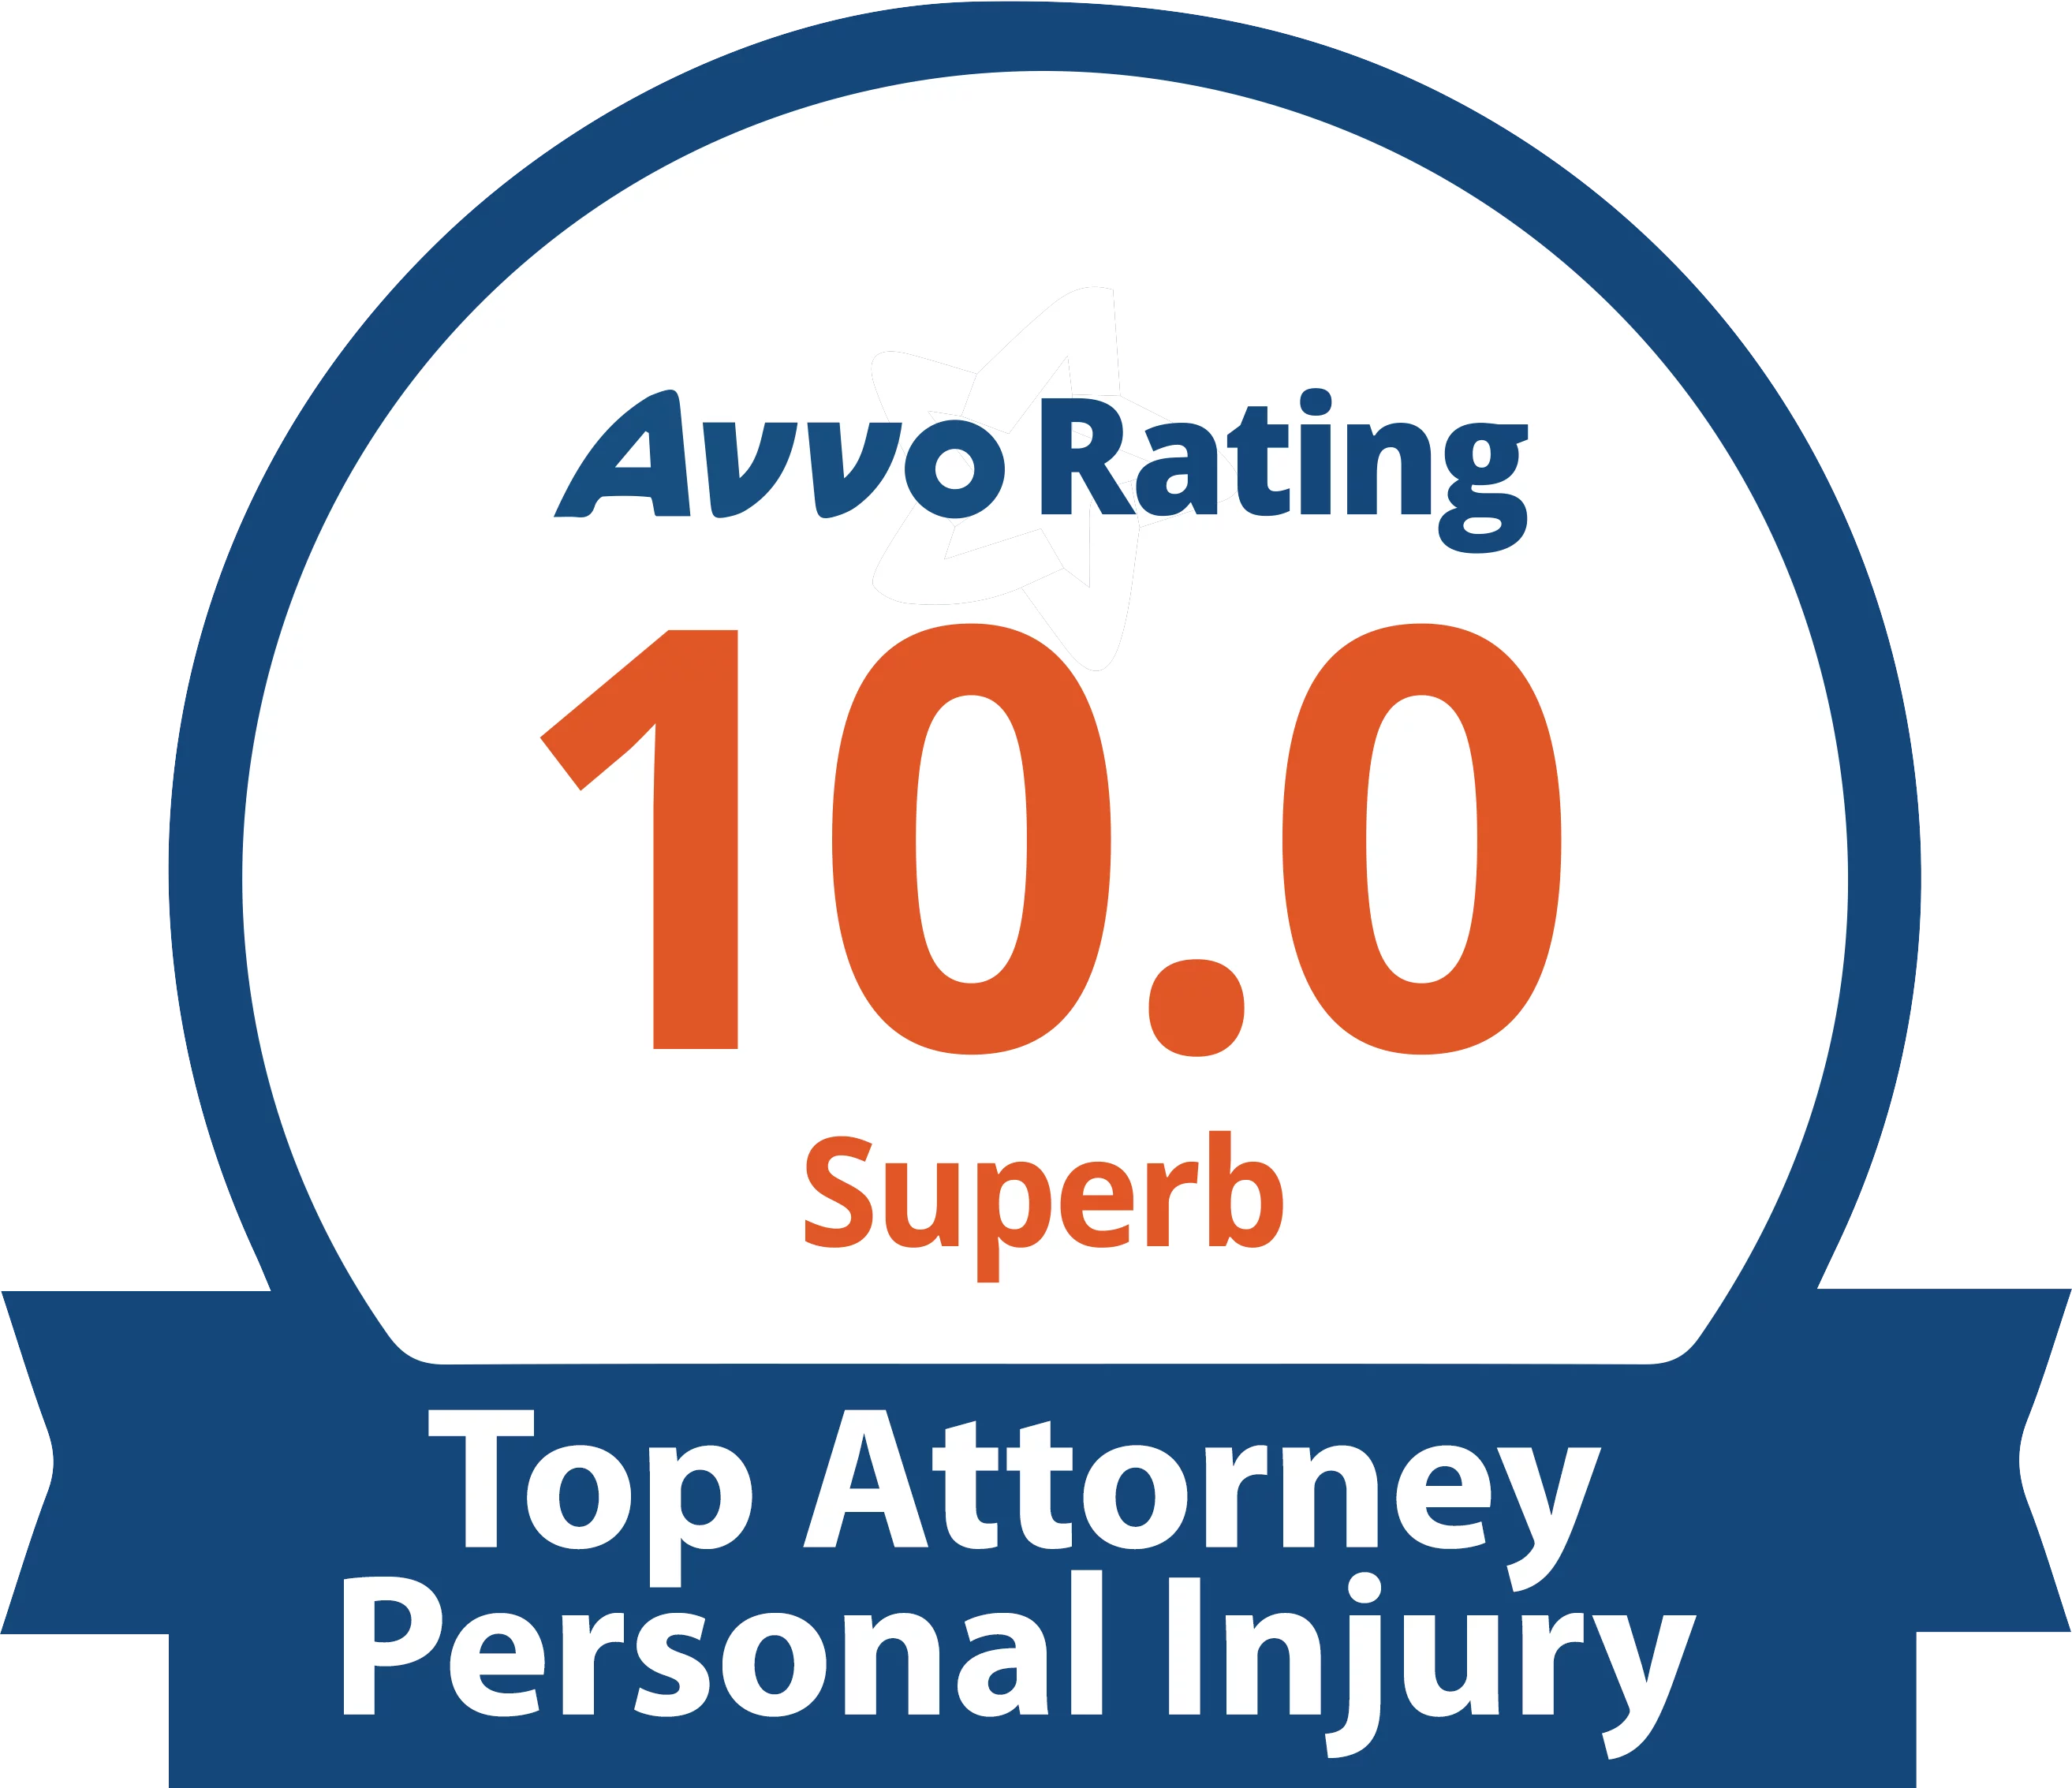 Avvo Rating 10 superb Top Attorney Personal Injury Logo